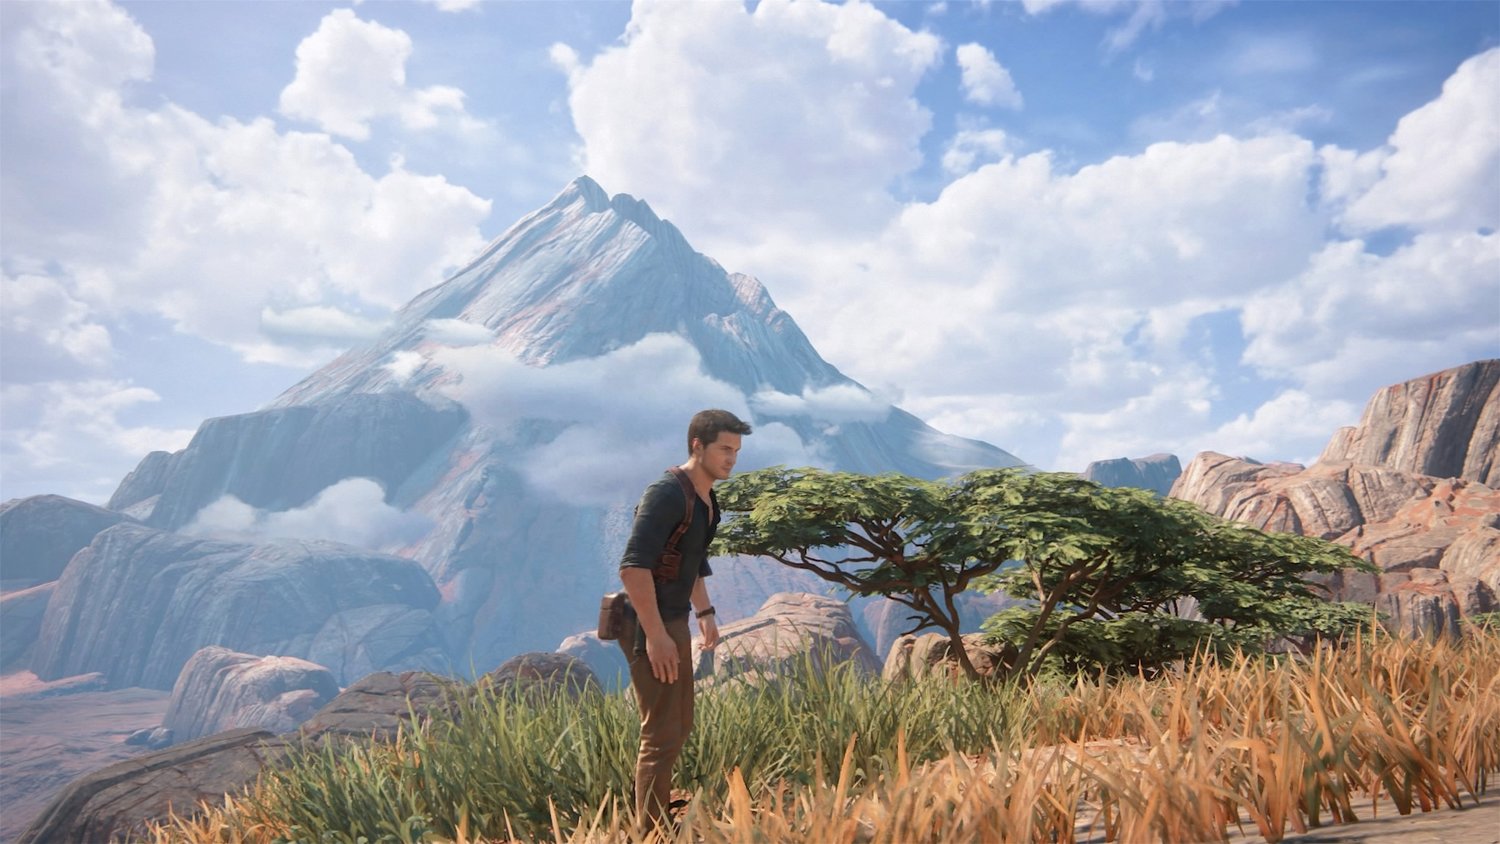 Uncharted 4 is one big action movie cliche — and it's amazing